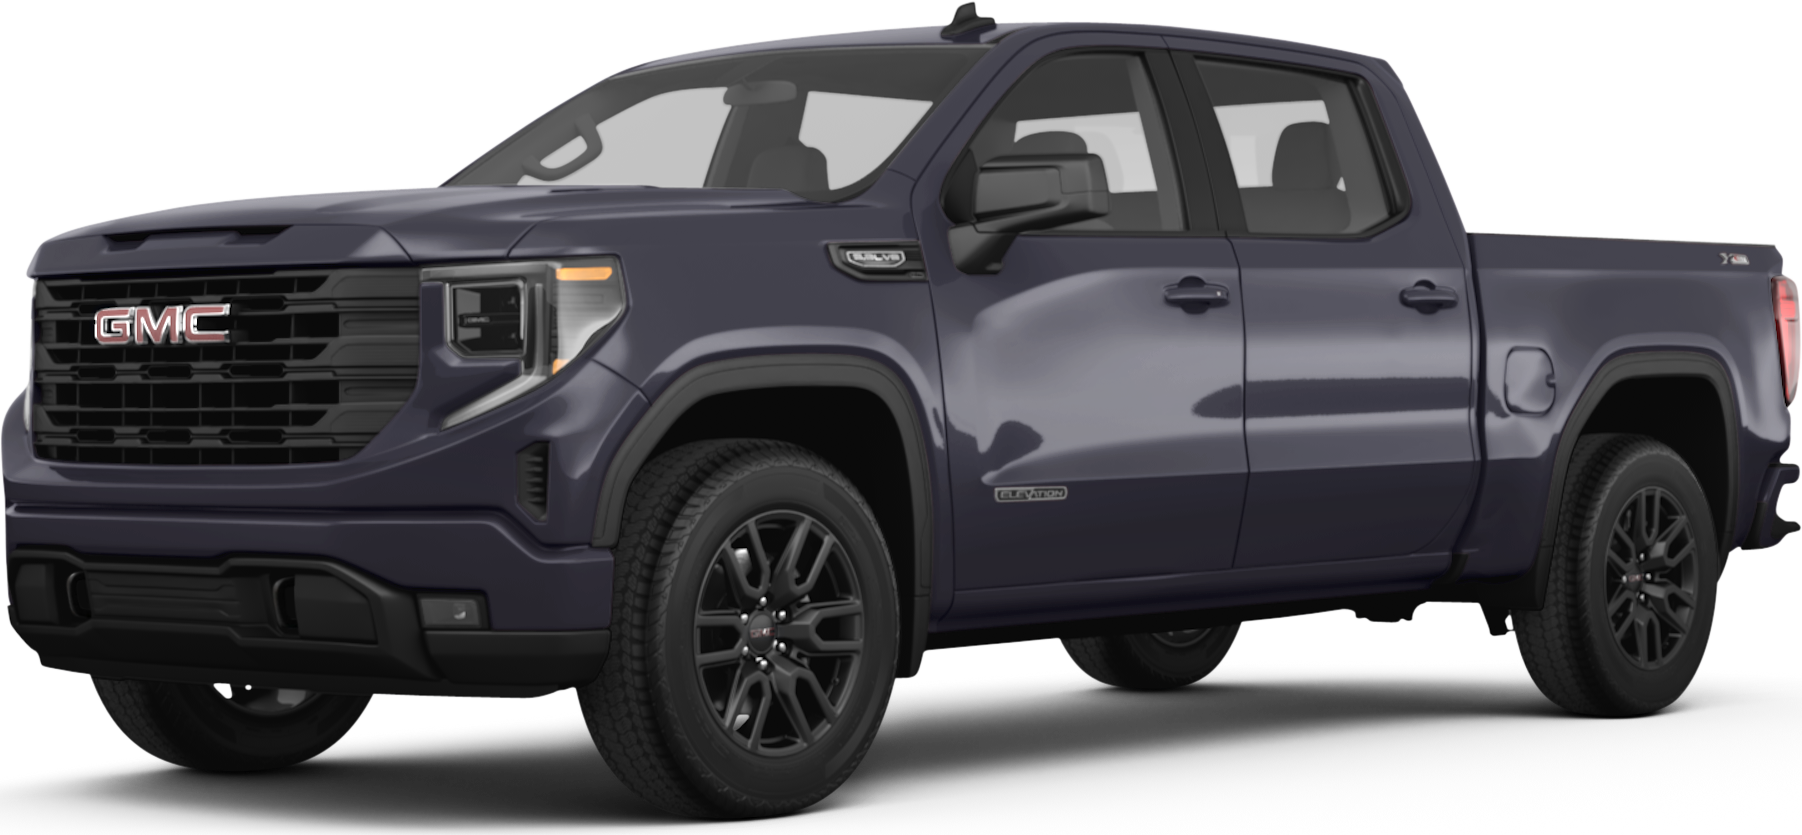 2023 GMC Sierra 1500 Crew Cab Price, Reviews, Pictures & More Kelley Blue Book